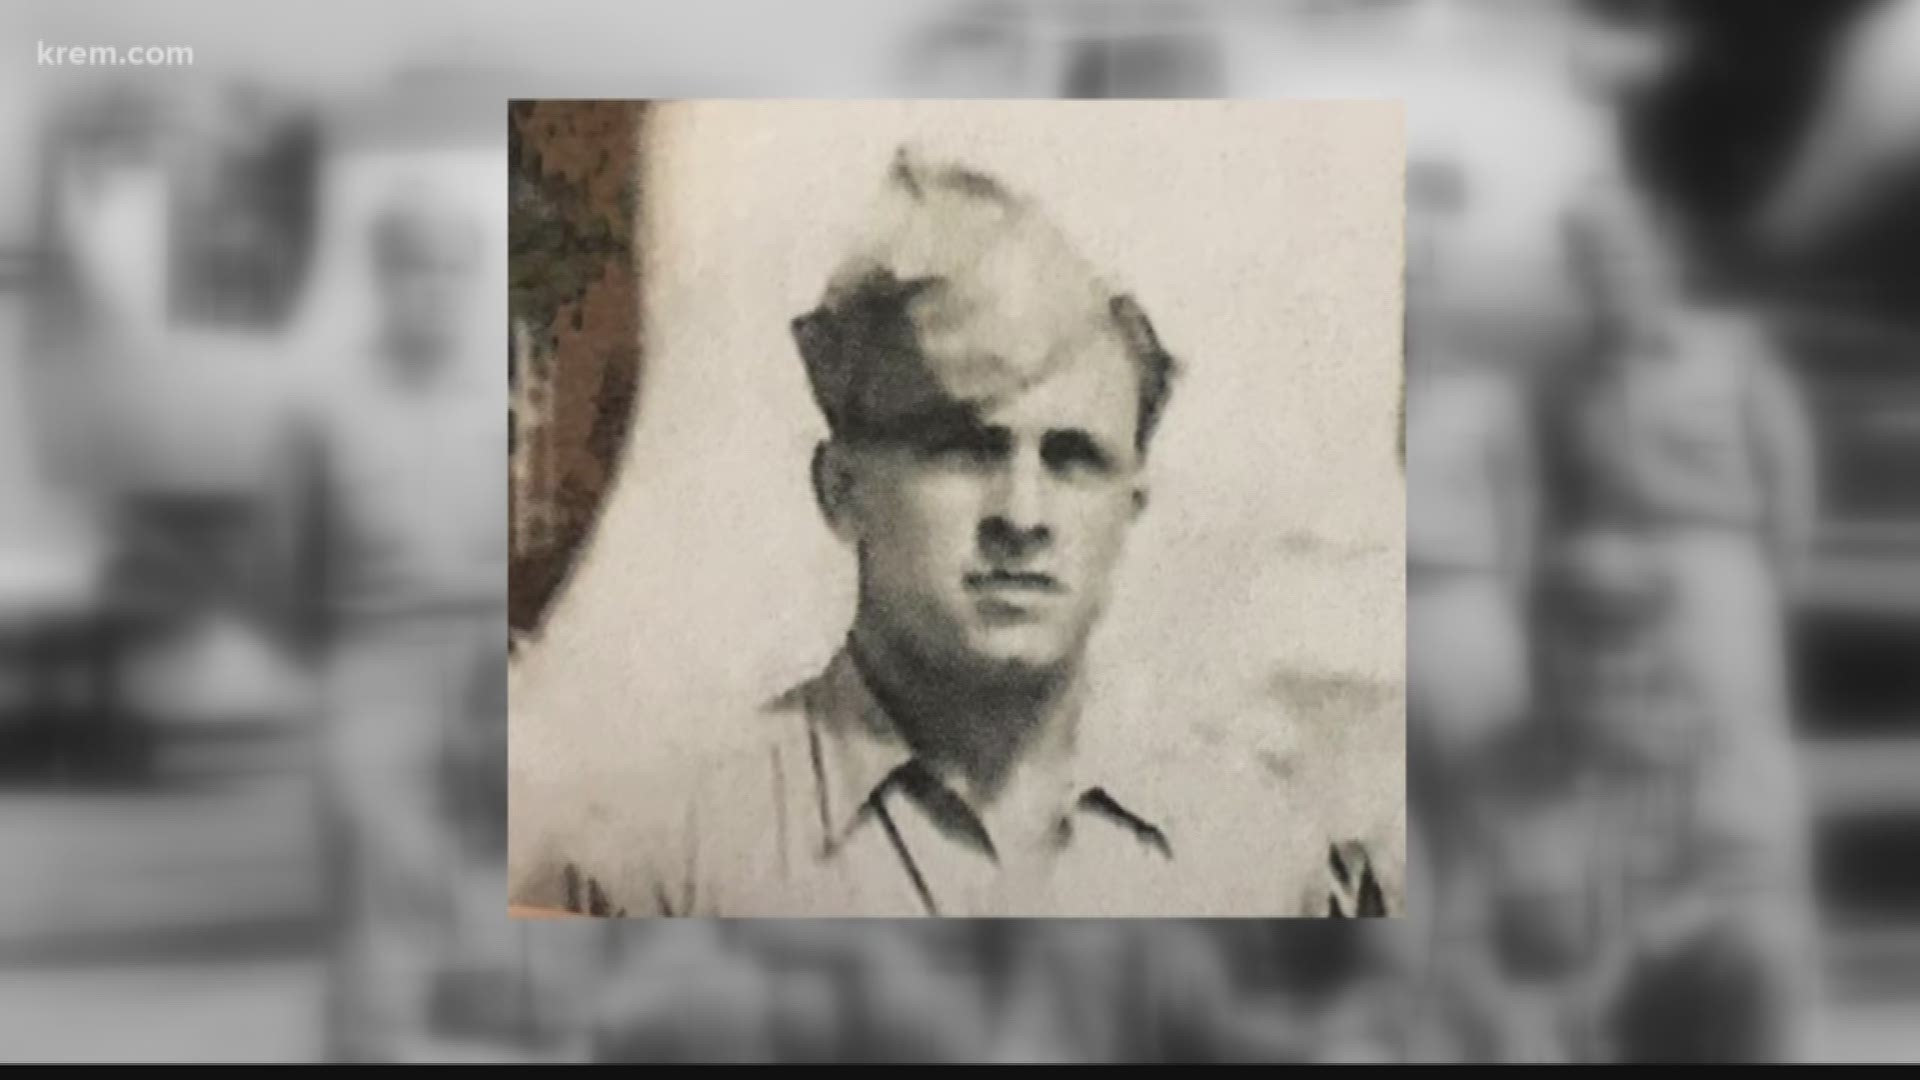 World War II airman finally laid to rest in N. Idaho 72 years after death